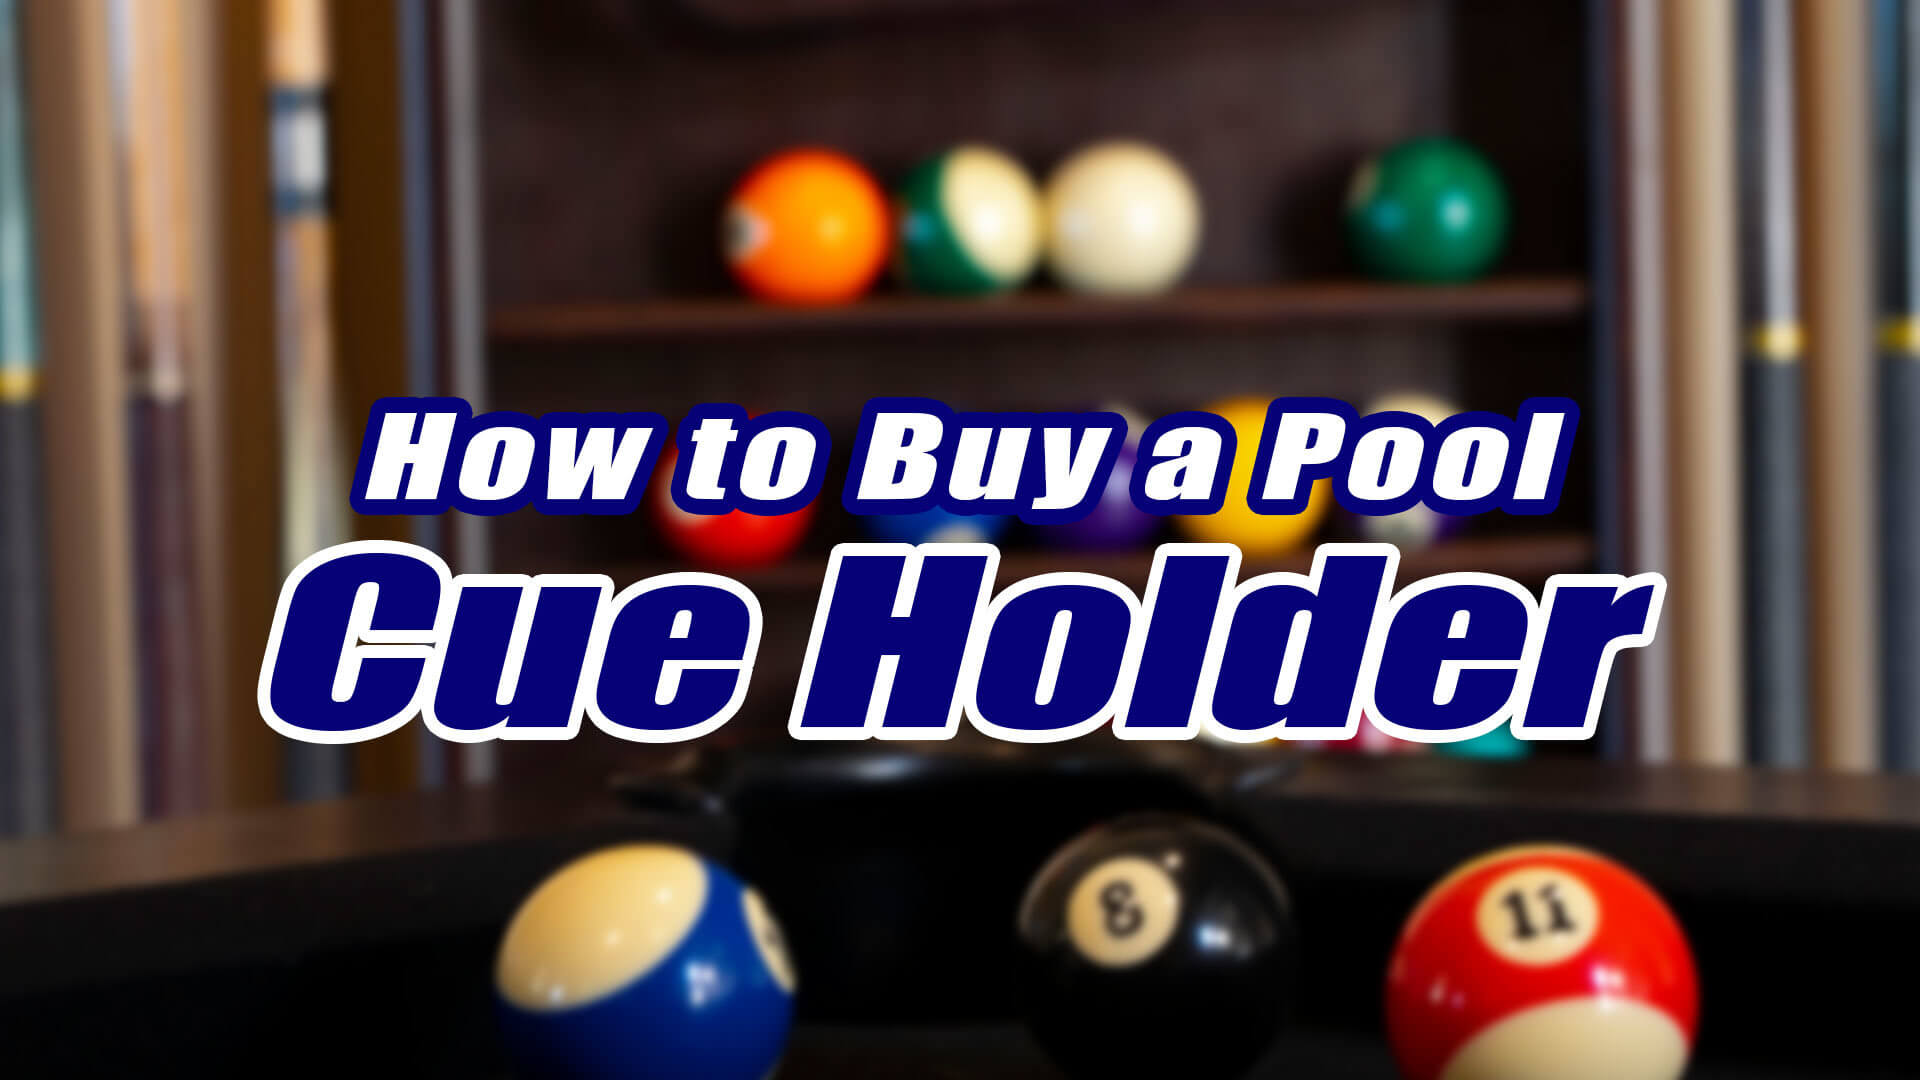 BLOG-How-to-Buy-a-Pool-Cue-Holder